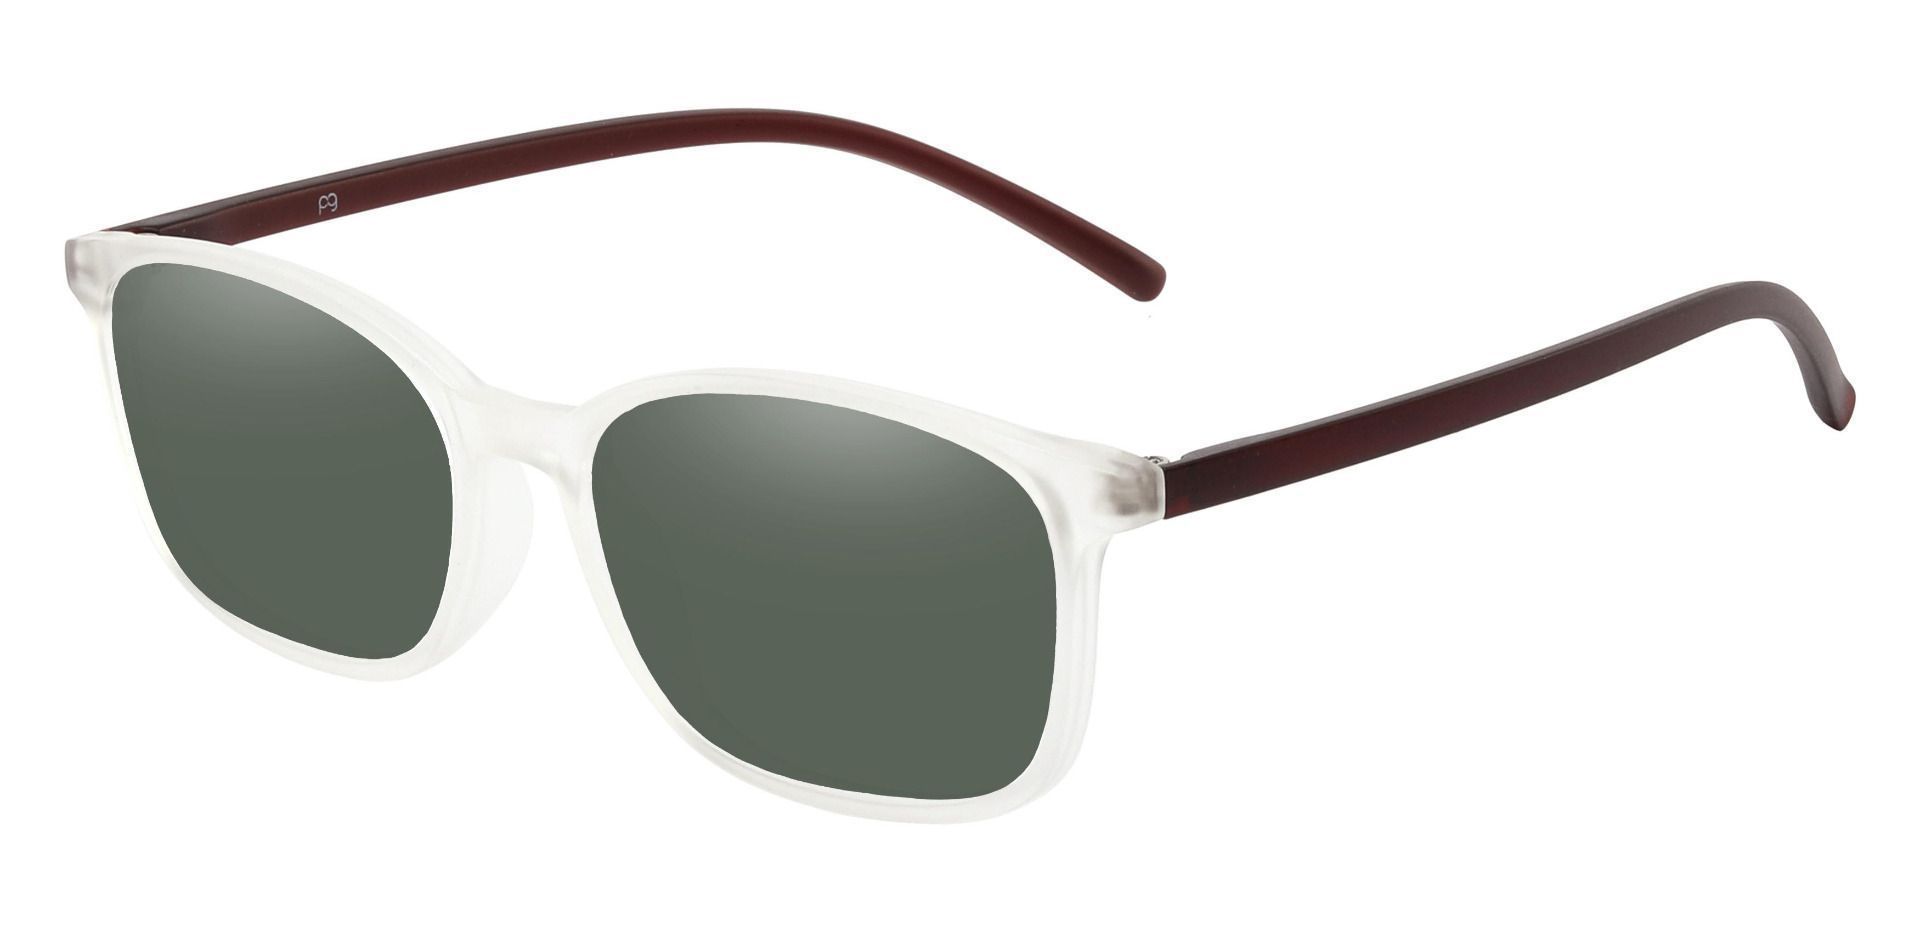 Onyx Square Non-Rx Sunglasses - Clear Frame With Green Lenses